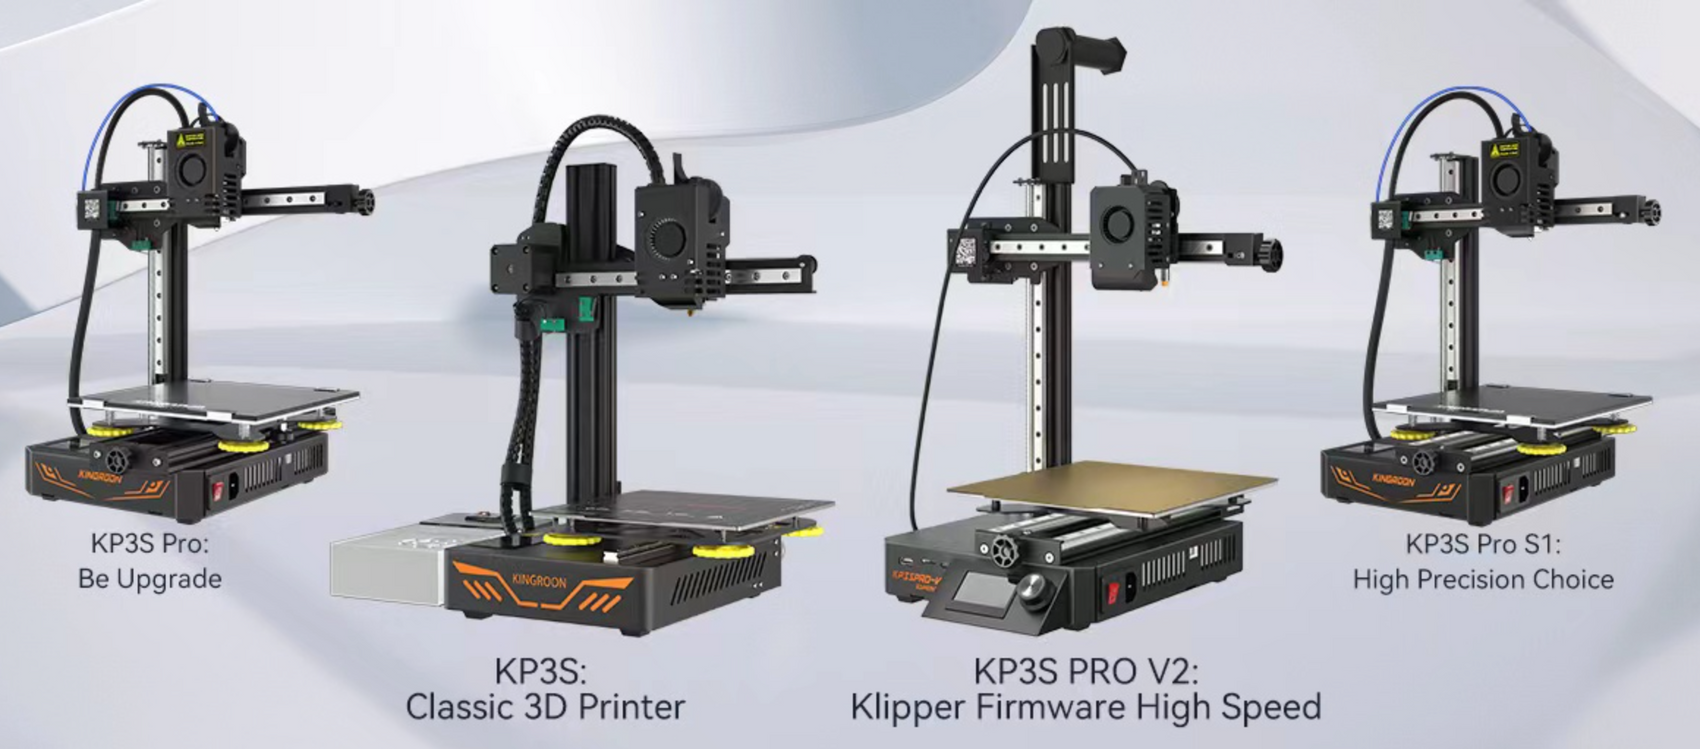 Kingroon KP3S vs. KP3S Pro vs. KP3S Pro S1 vs. KP3S Pro V2 -- Which one to buy?